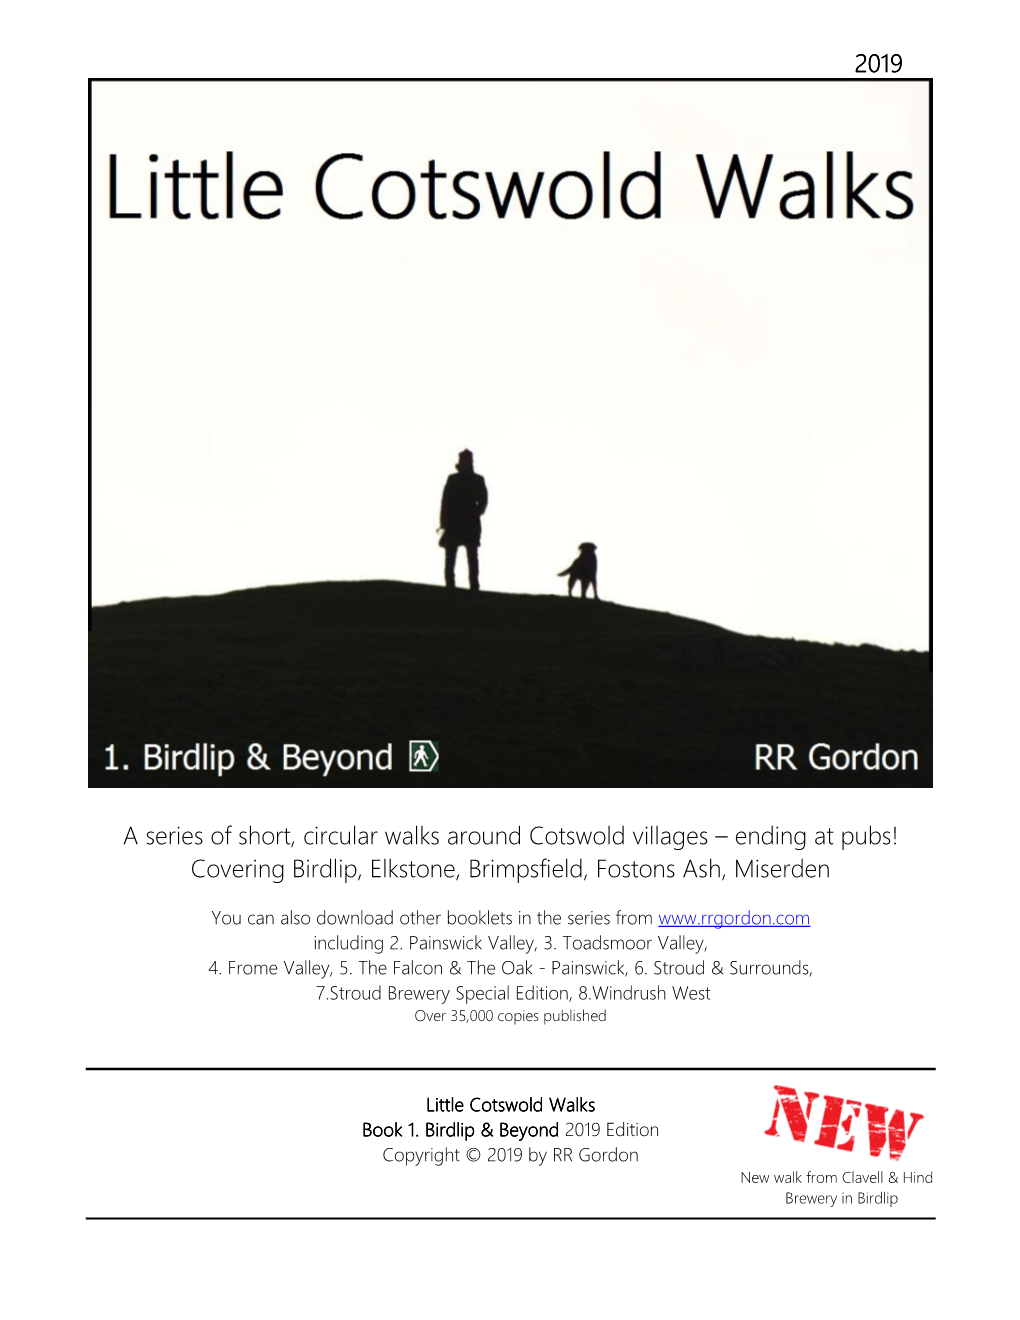 2019 a Series of Short, Circular Walks Around Cotswold Villages